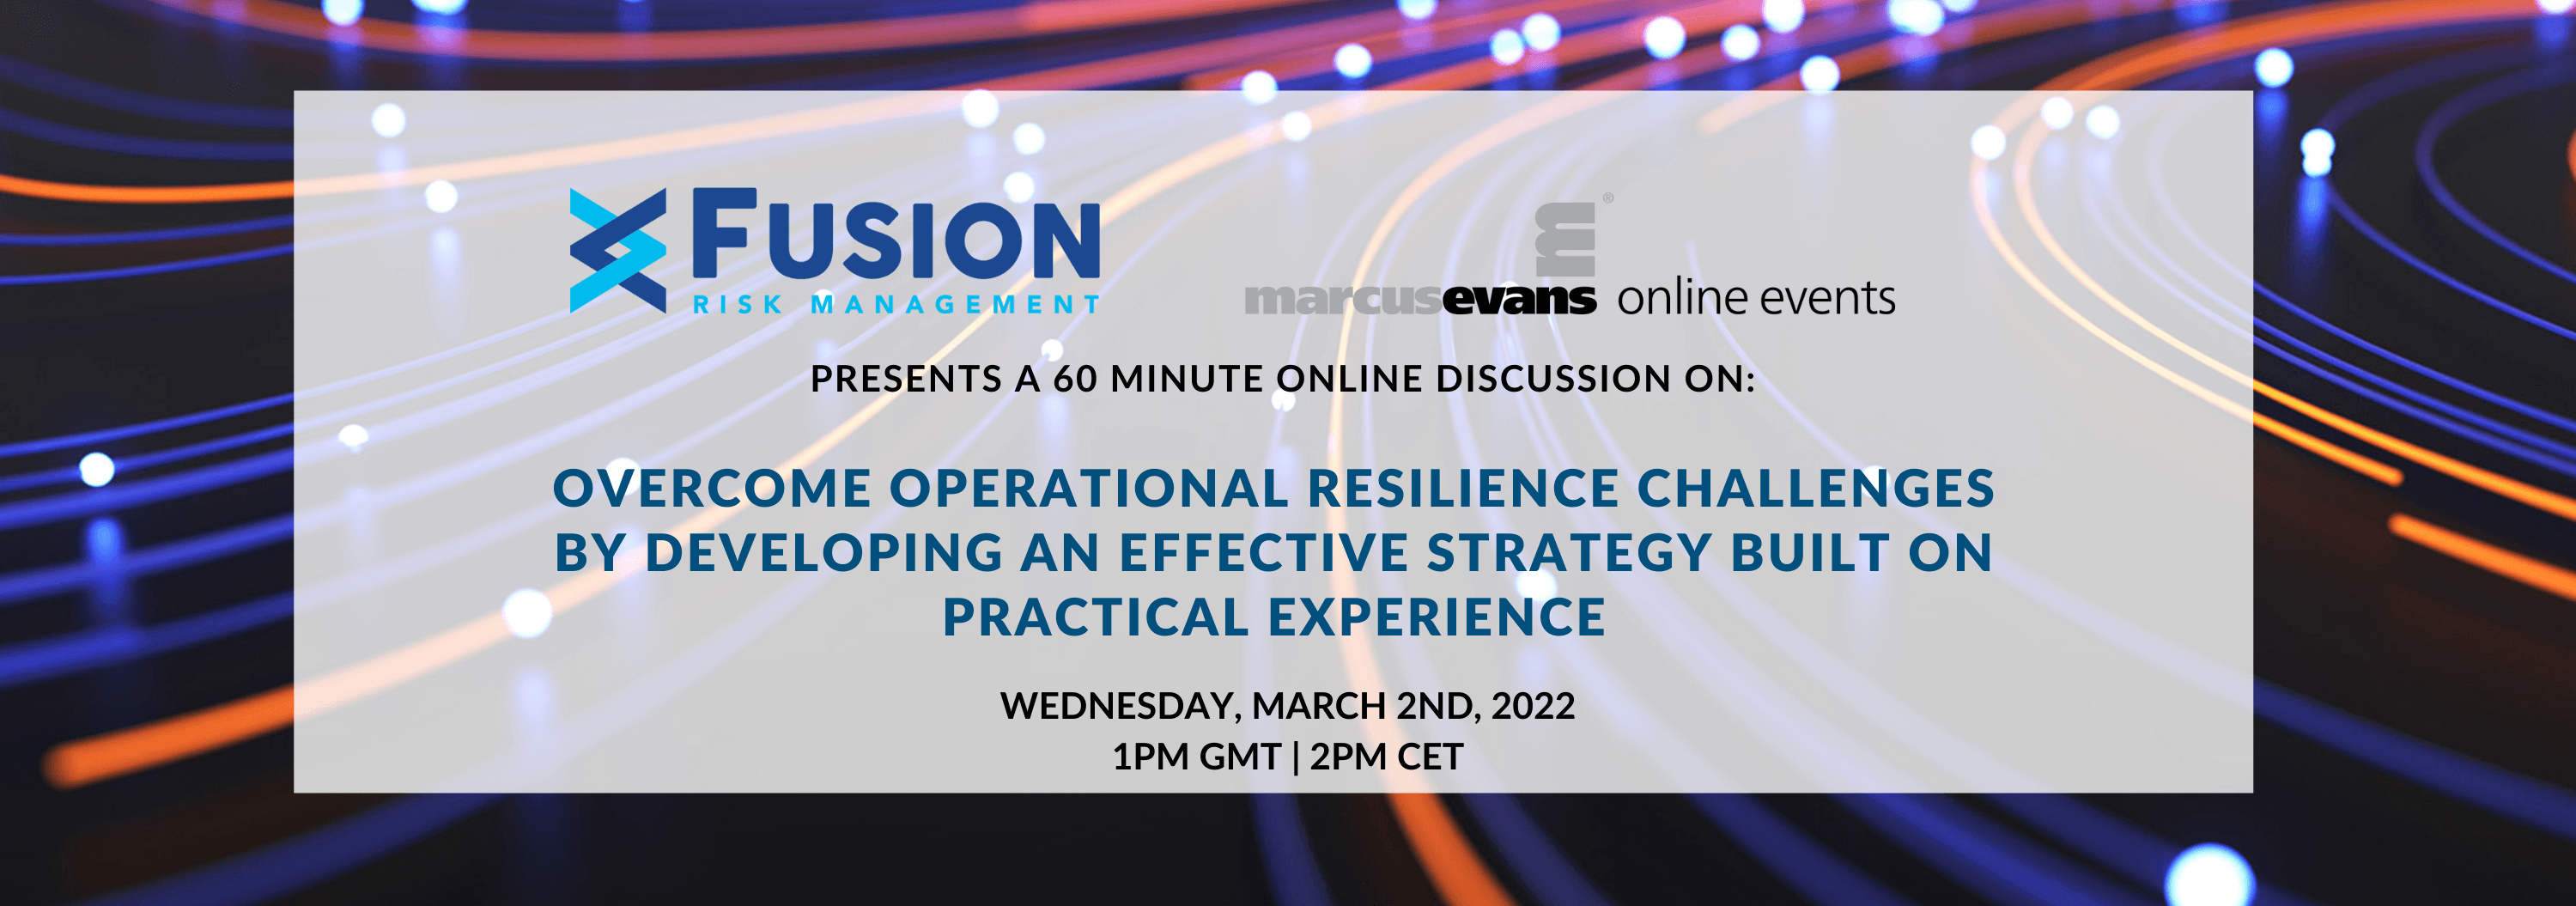 Overcome Operational Resilience Challenges by Developing an Effective Strategy Built on Practical Experience Image